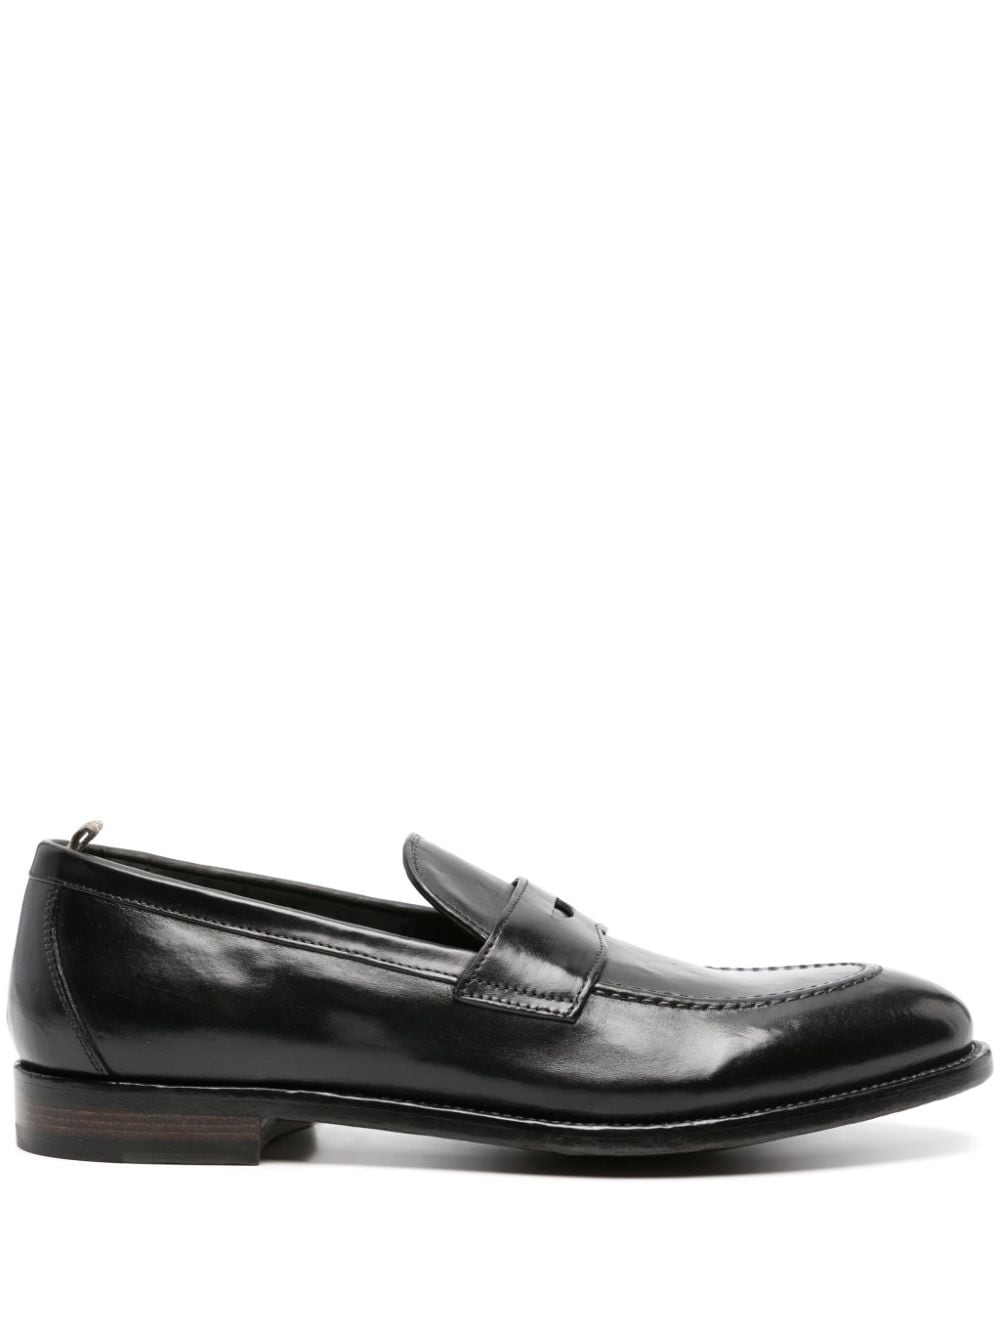 Officine Creative Tulane 003 leather penny loafers Black